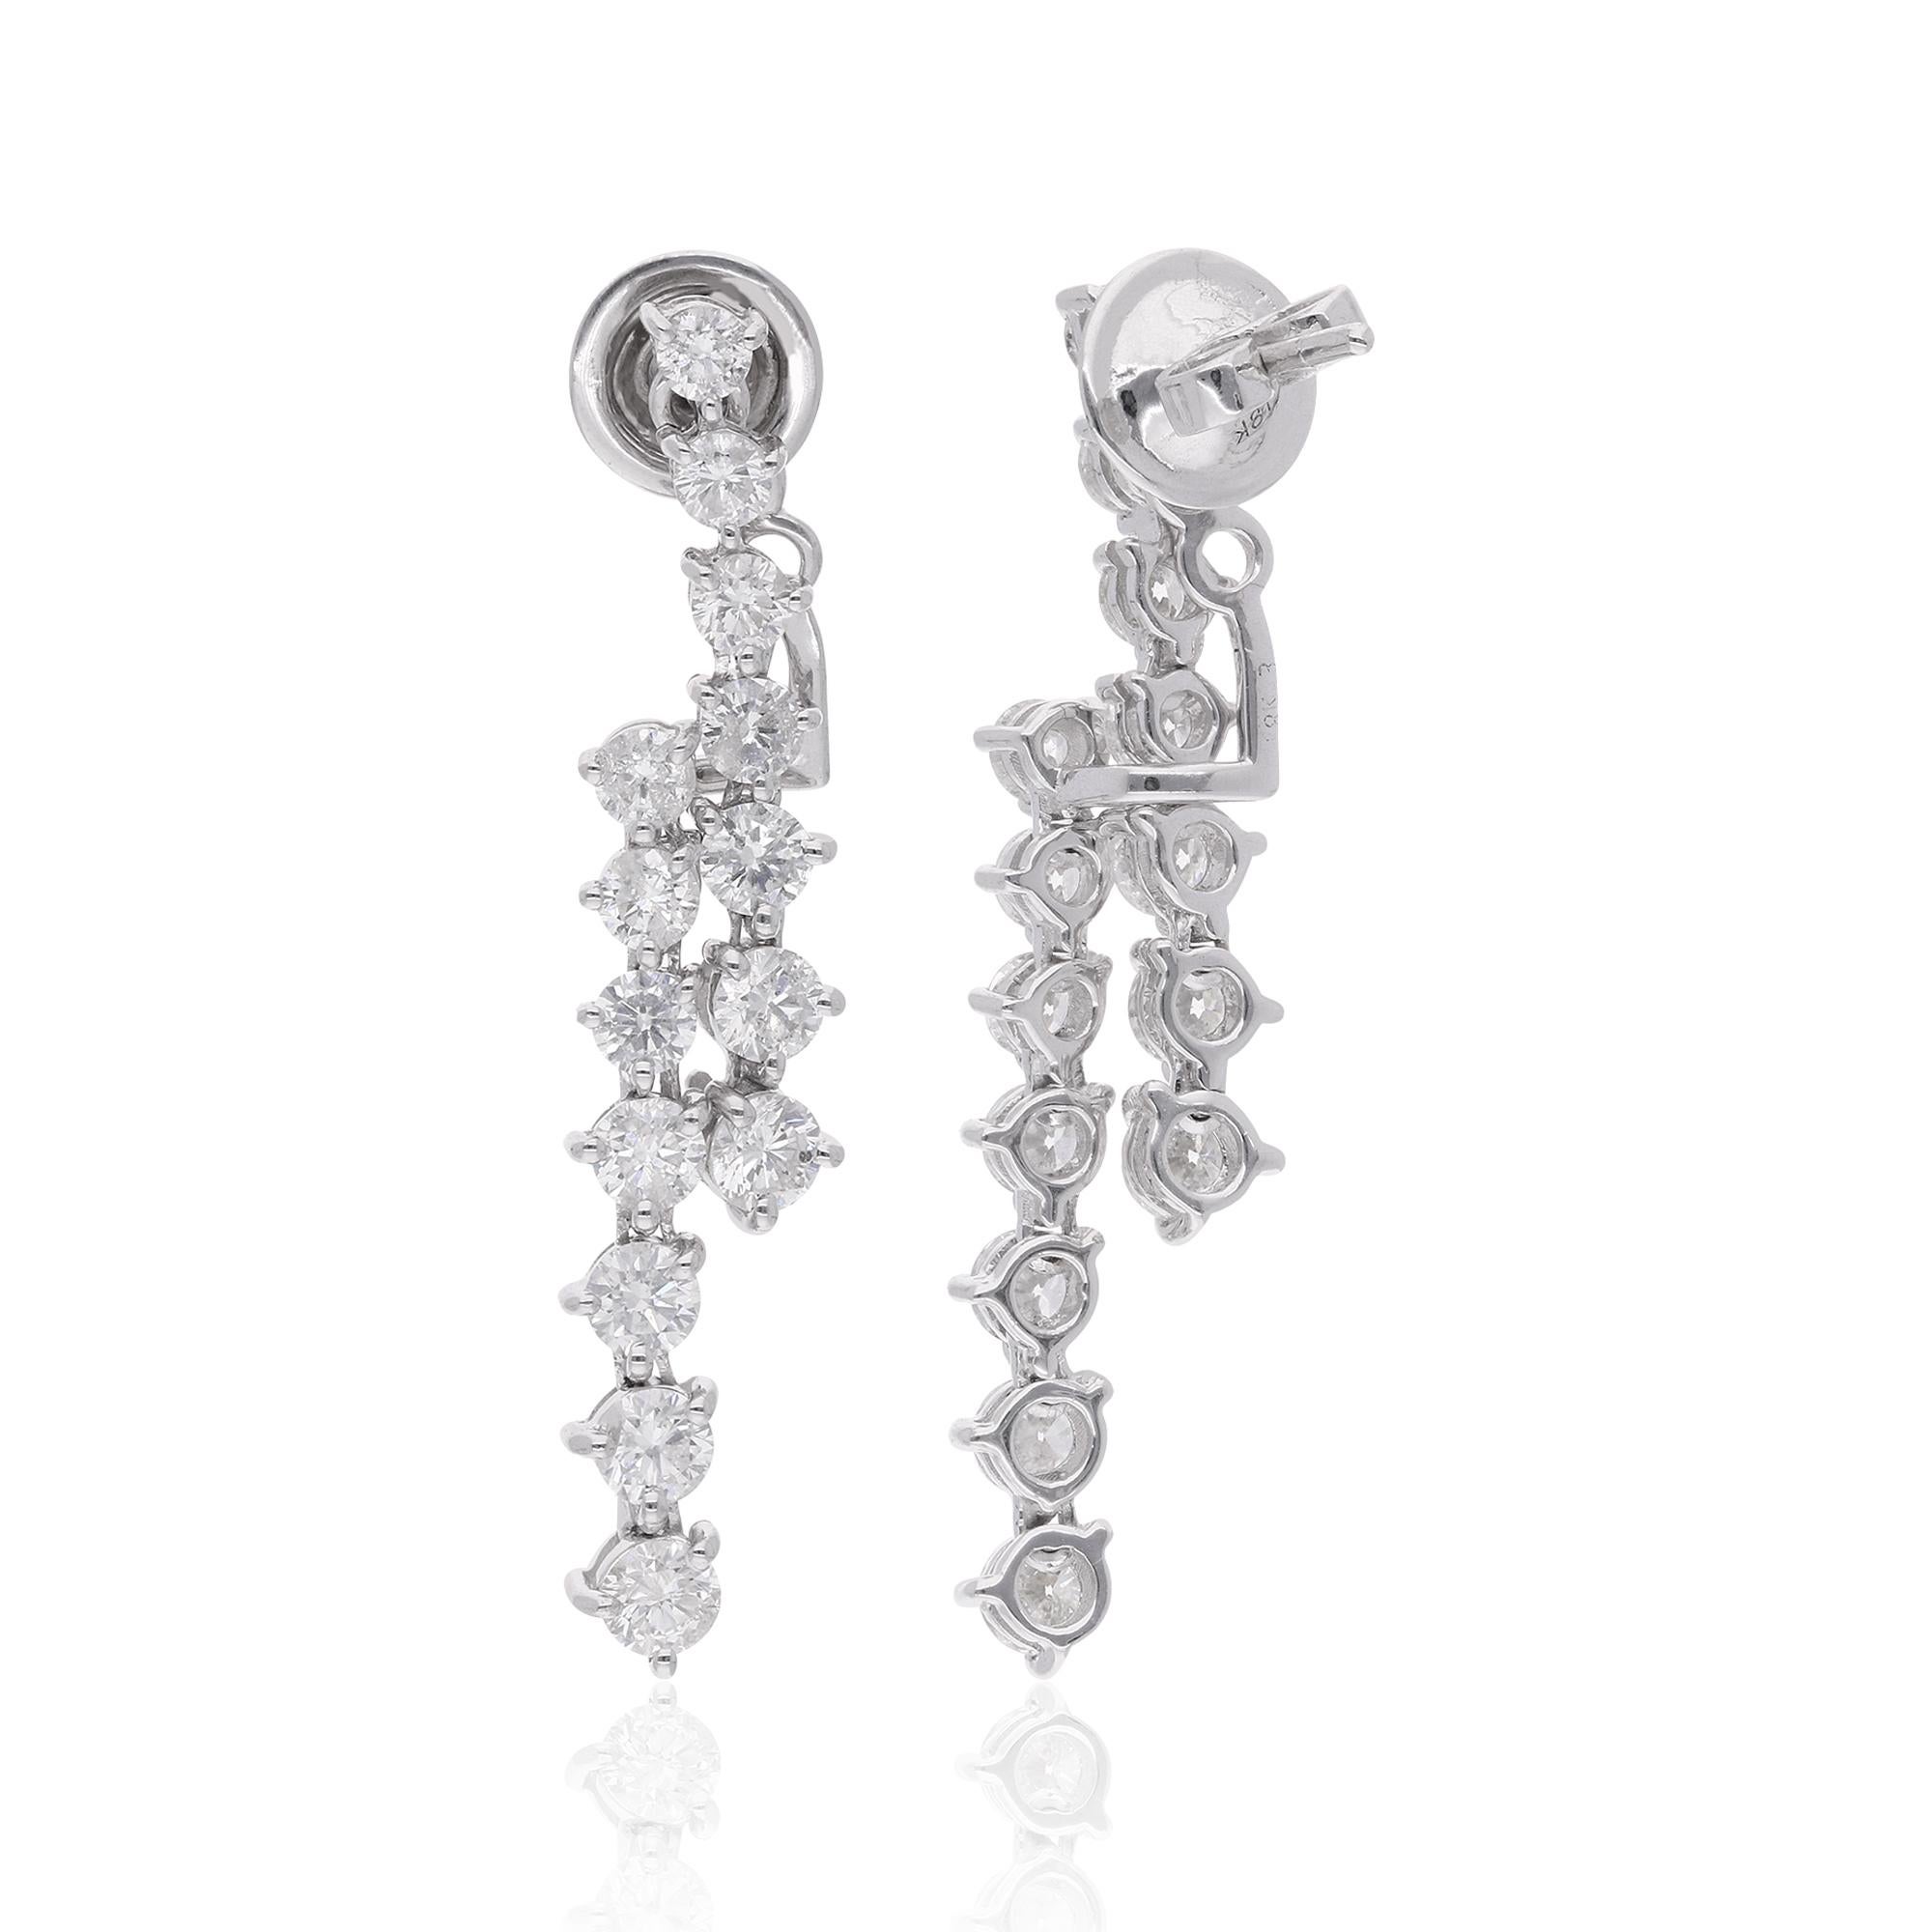 Add a touch of elegance and brilliance to your ensemble with these stunning Diamond Ear Jacket Earrings. Handcrafted with care and designed to impress, each earring features beautiful round-cut diamonds set in a 3 prong setting. These earrings are